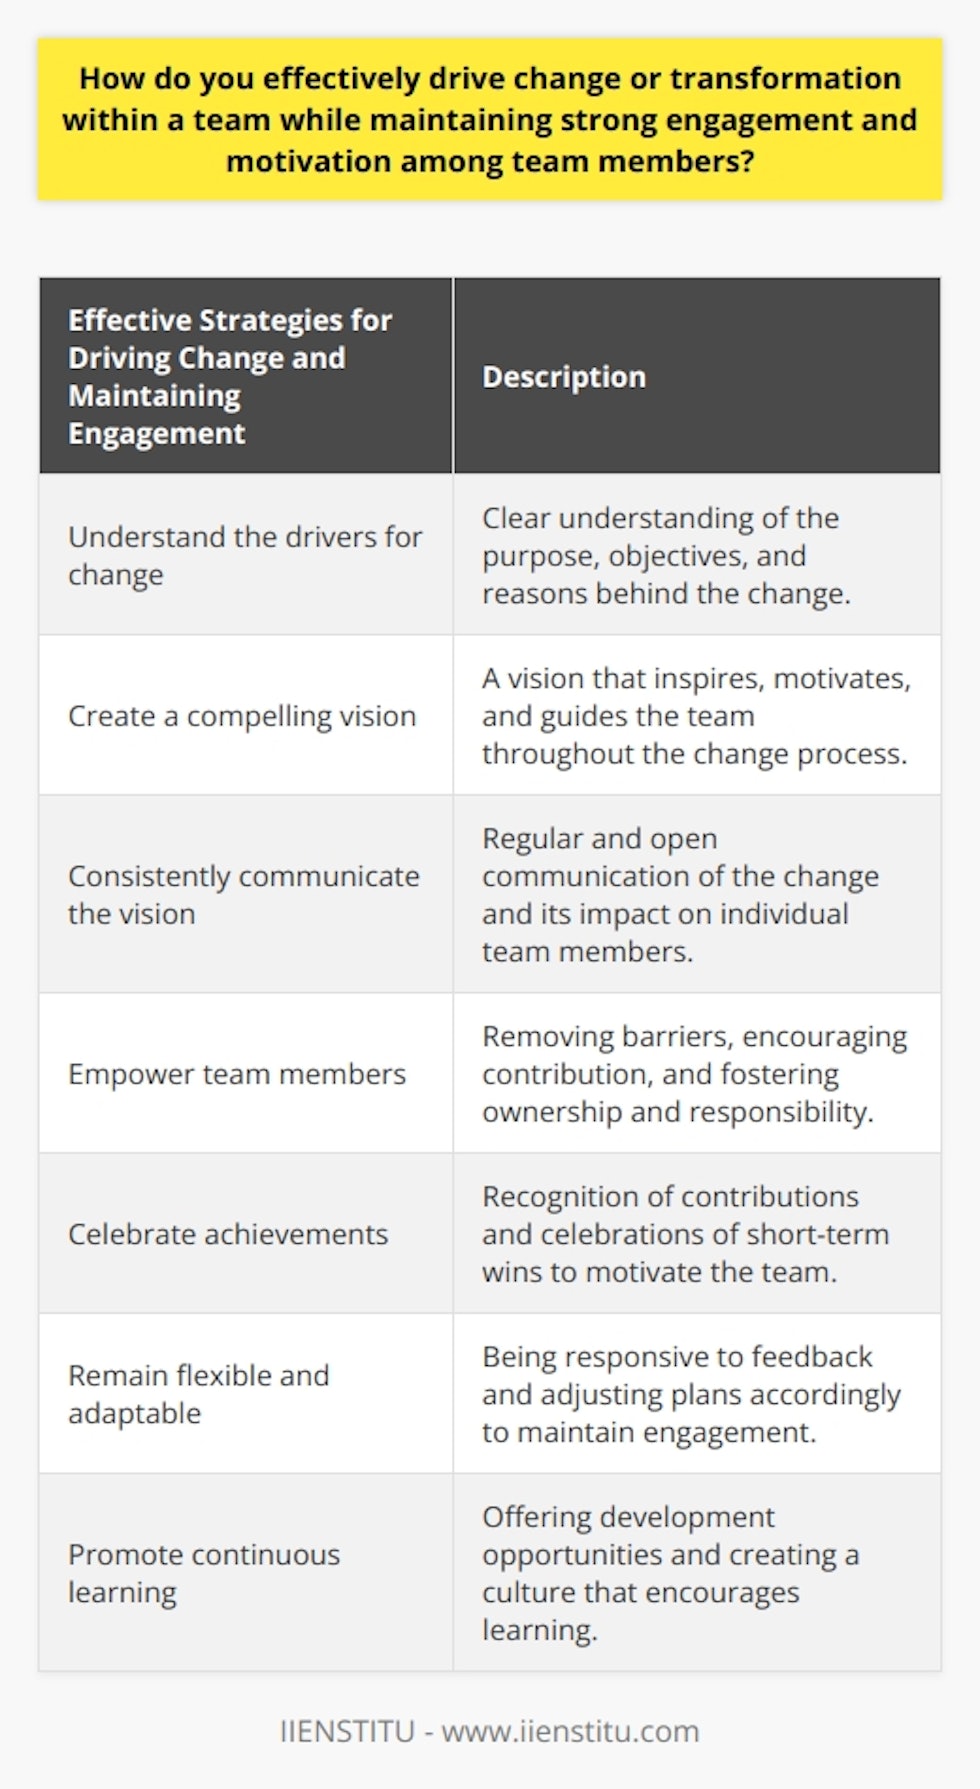 In order to effectively drive change or transformation within a team while maintaining strong engagement and motivation among team members, it is important to understand the drivers for change. This involves being clear about the purpose and objectives of the change, as well as the reasons behind it.Once the drivers for change are understood, it is crucial to create a compelling vision for the change. This vision should encompass the desired future and serve as a source of inspiration, motivation, and guidance for the team throughout the change process.Communication is key when it comes to driving change effectively. It is important to consistently and openly communicate the vision to the team. Each team member should understand what the change means for them individually and how they can contribute to it. Clear, regular, and honest communication helps enhance motivation and engagement.Empowering team members is another essential aspect of driving change within a team. By removing barriers and encouraging their contribution to the change process, team members can develop a sense of ownership and responsibility. This, in turn, nurtures motivation and engagement among team members.Celebrating achievements, especially short-term wins, plays a significant role in maintaining motivation and engagement. Recognizing team members' contributions and celebrating their successes instills a sense of accomplishment and encourages the team to continue pushing forward.Remaining flexible and adaptable throughout the change process is crucial. It is important to be responsive to feedback from team members and, if needed, adjust plans accordingly. This shows respect for their opinions and fosters a sense of engagement.Promoting a culture of continuous learning is also vital when driving change effectively within a team. Offering regular development opportunities and creating an atmosphere that encourages learning equips team members with the skills and knowledge needed to navigate change successfully. This, in turn, fosters engagement and promotes growth among team members.In conclusion, to effectively drive change or transformation within a team while maintaining strong engagement and motivation, it is important to have a well-articulated vision, regularly communicate it, empower team members, celebrate achievements, remain flexible, and promote continuous learning. By implementing these strategies, teams can navigate change successfully while keeping team members engaged and motivated.